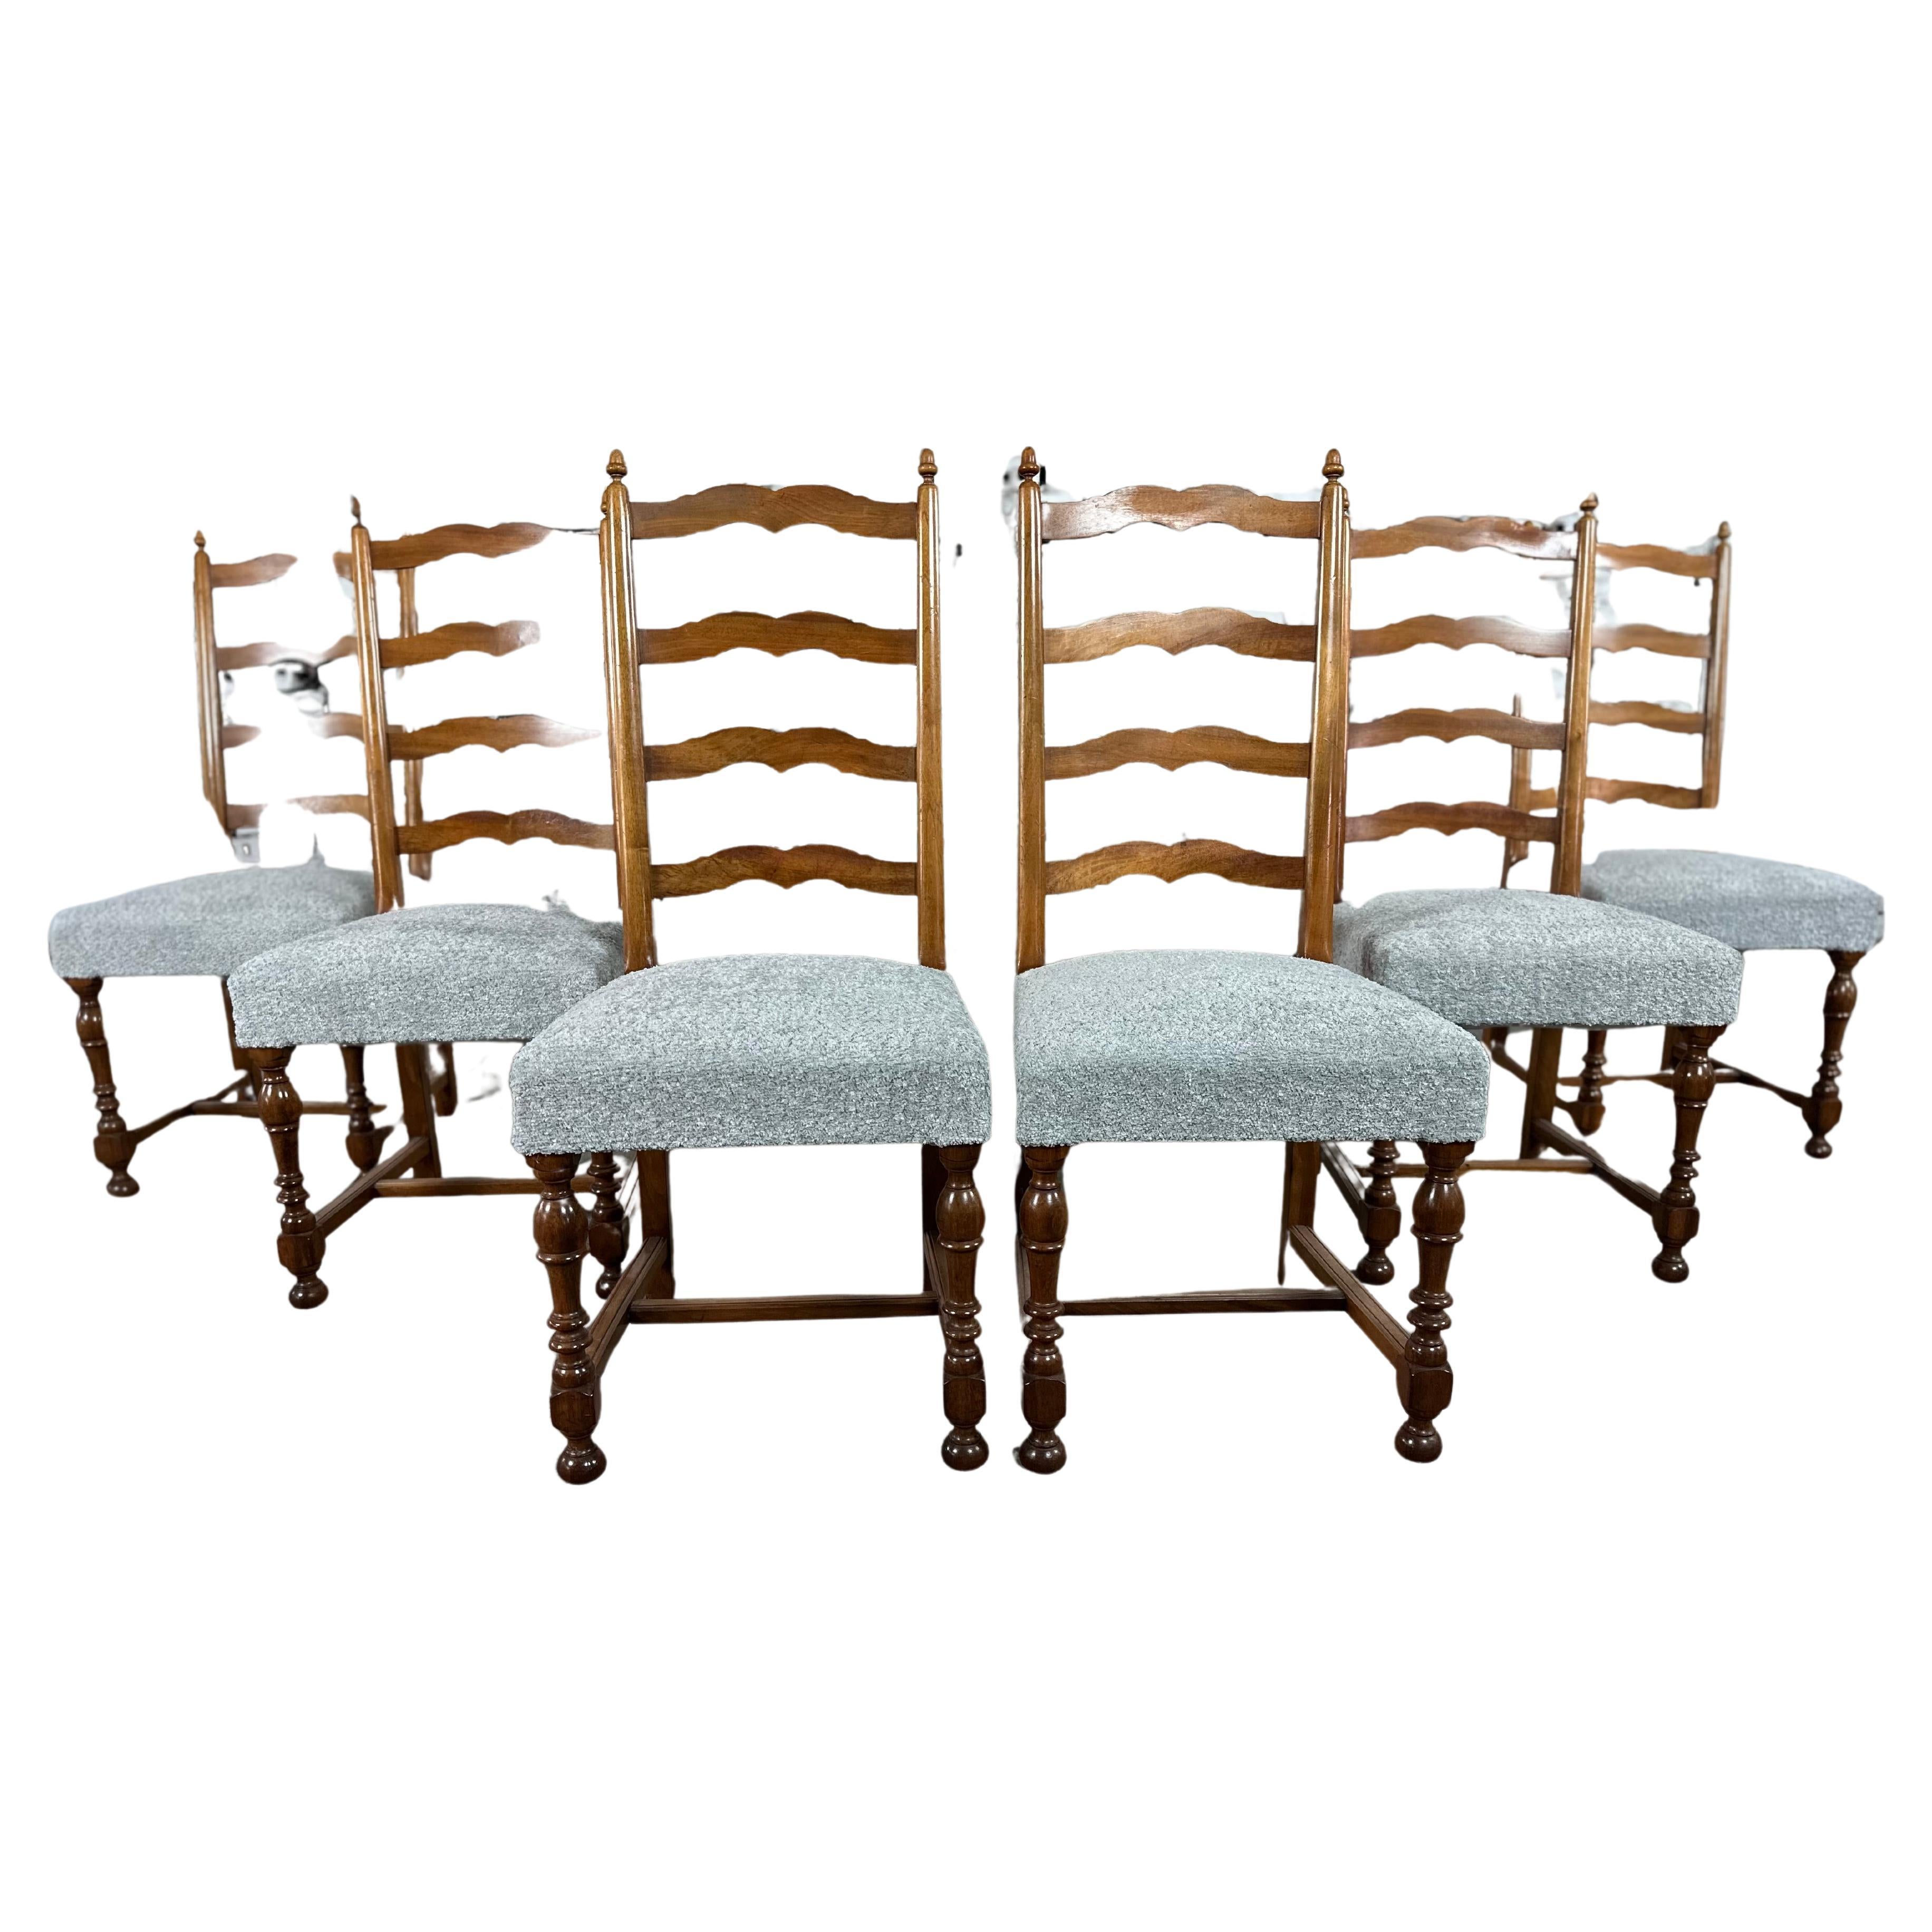 Reupholstered French Country Ladder Back Dining Chairs - Set of 6